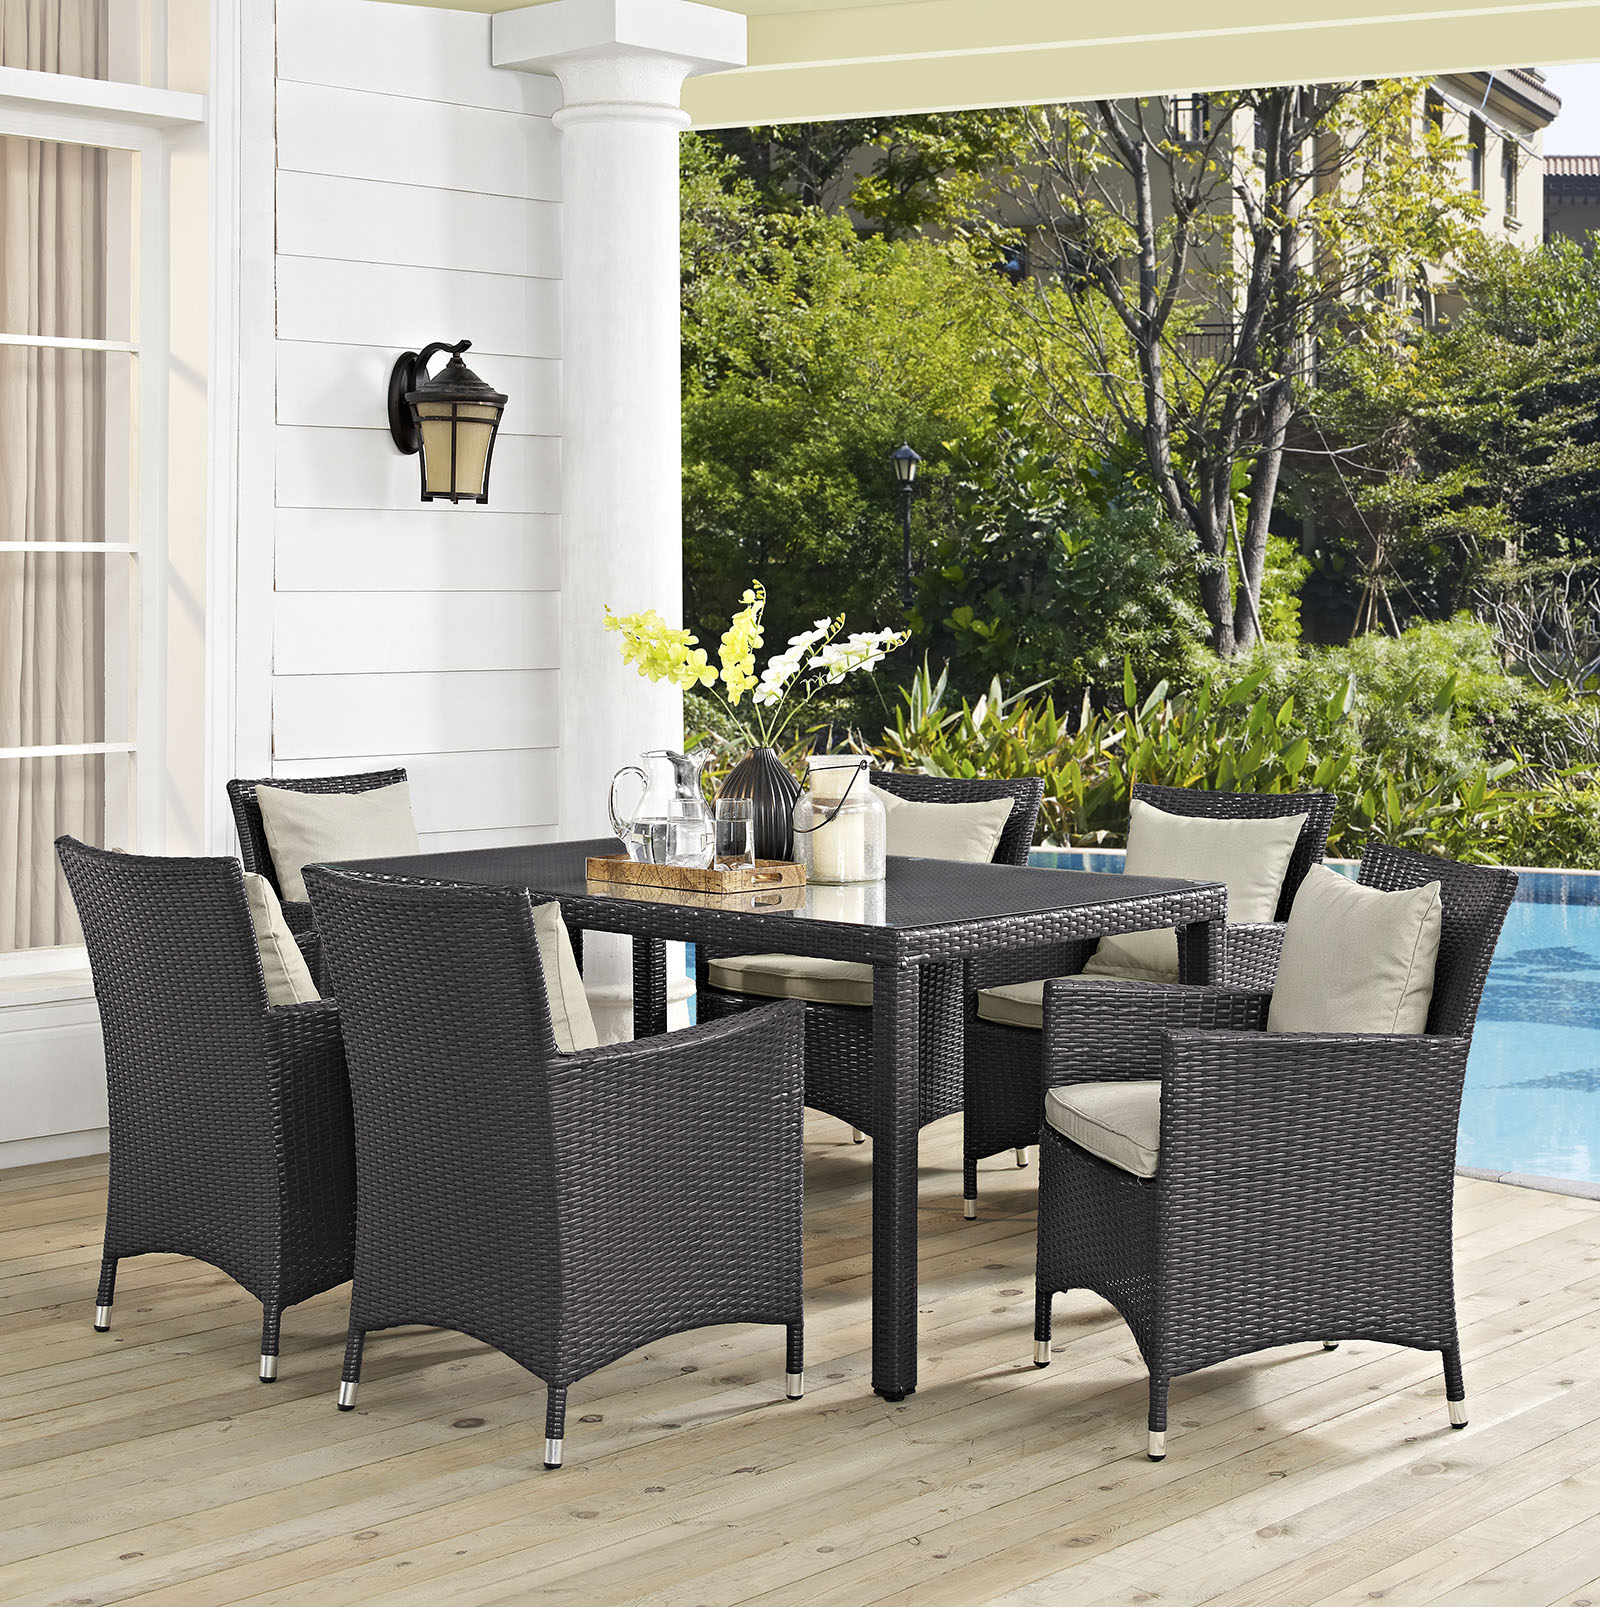 Modern Contemporary Urban Design Outdoor Patio Balcony Seven PCS Dining Chairs and Table Set, Beige, Rattan - image 2 of 7